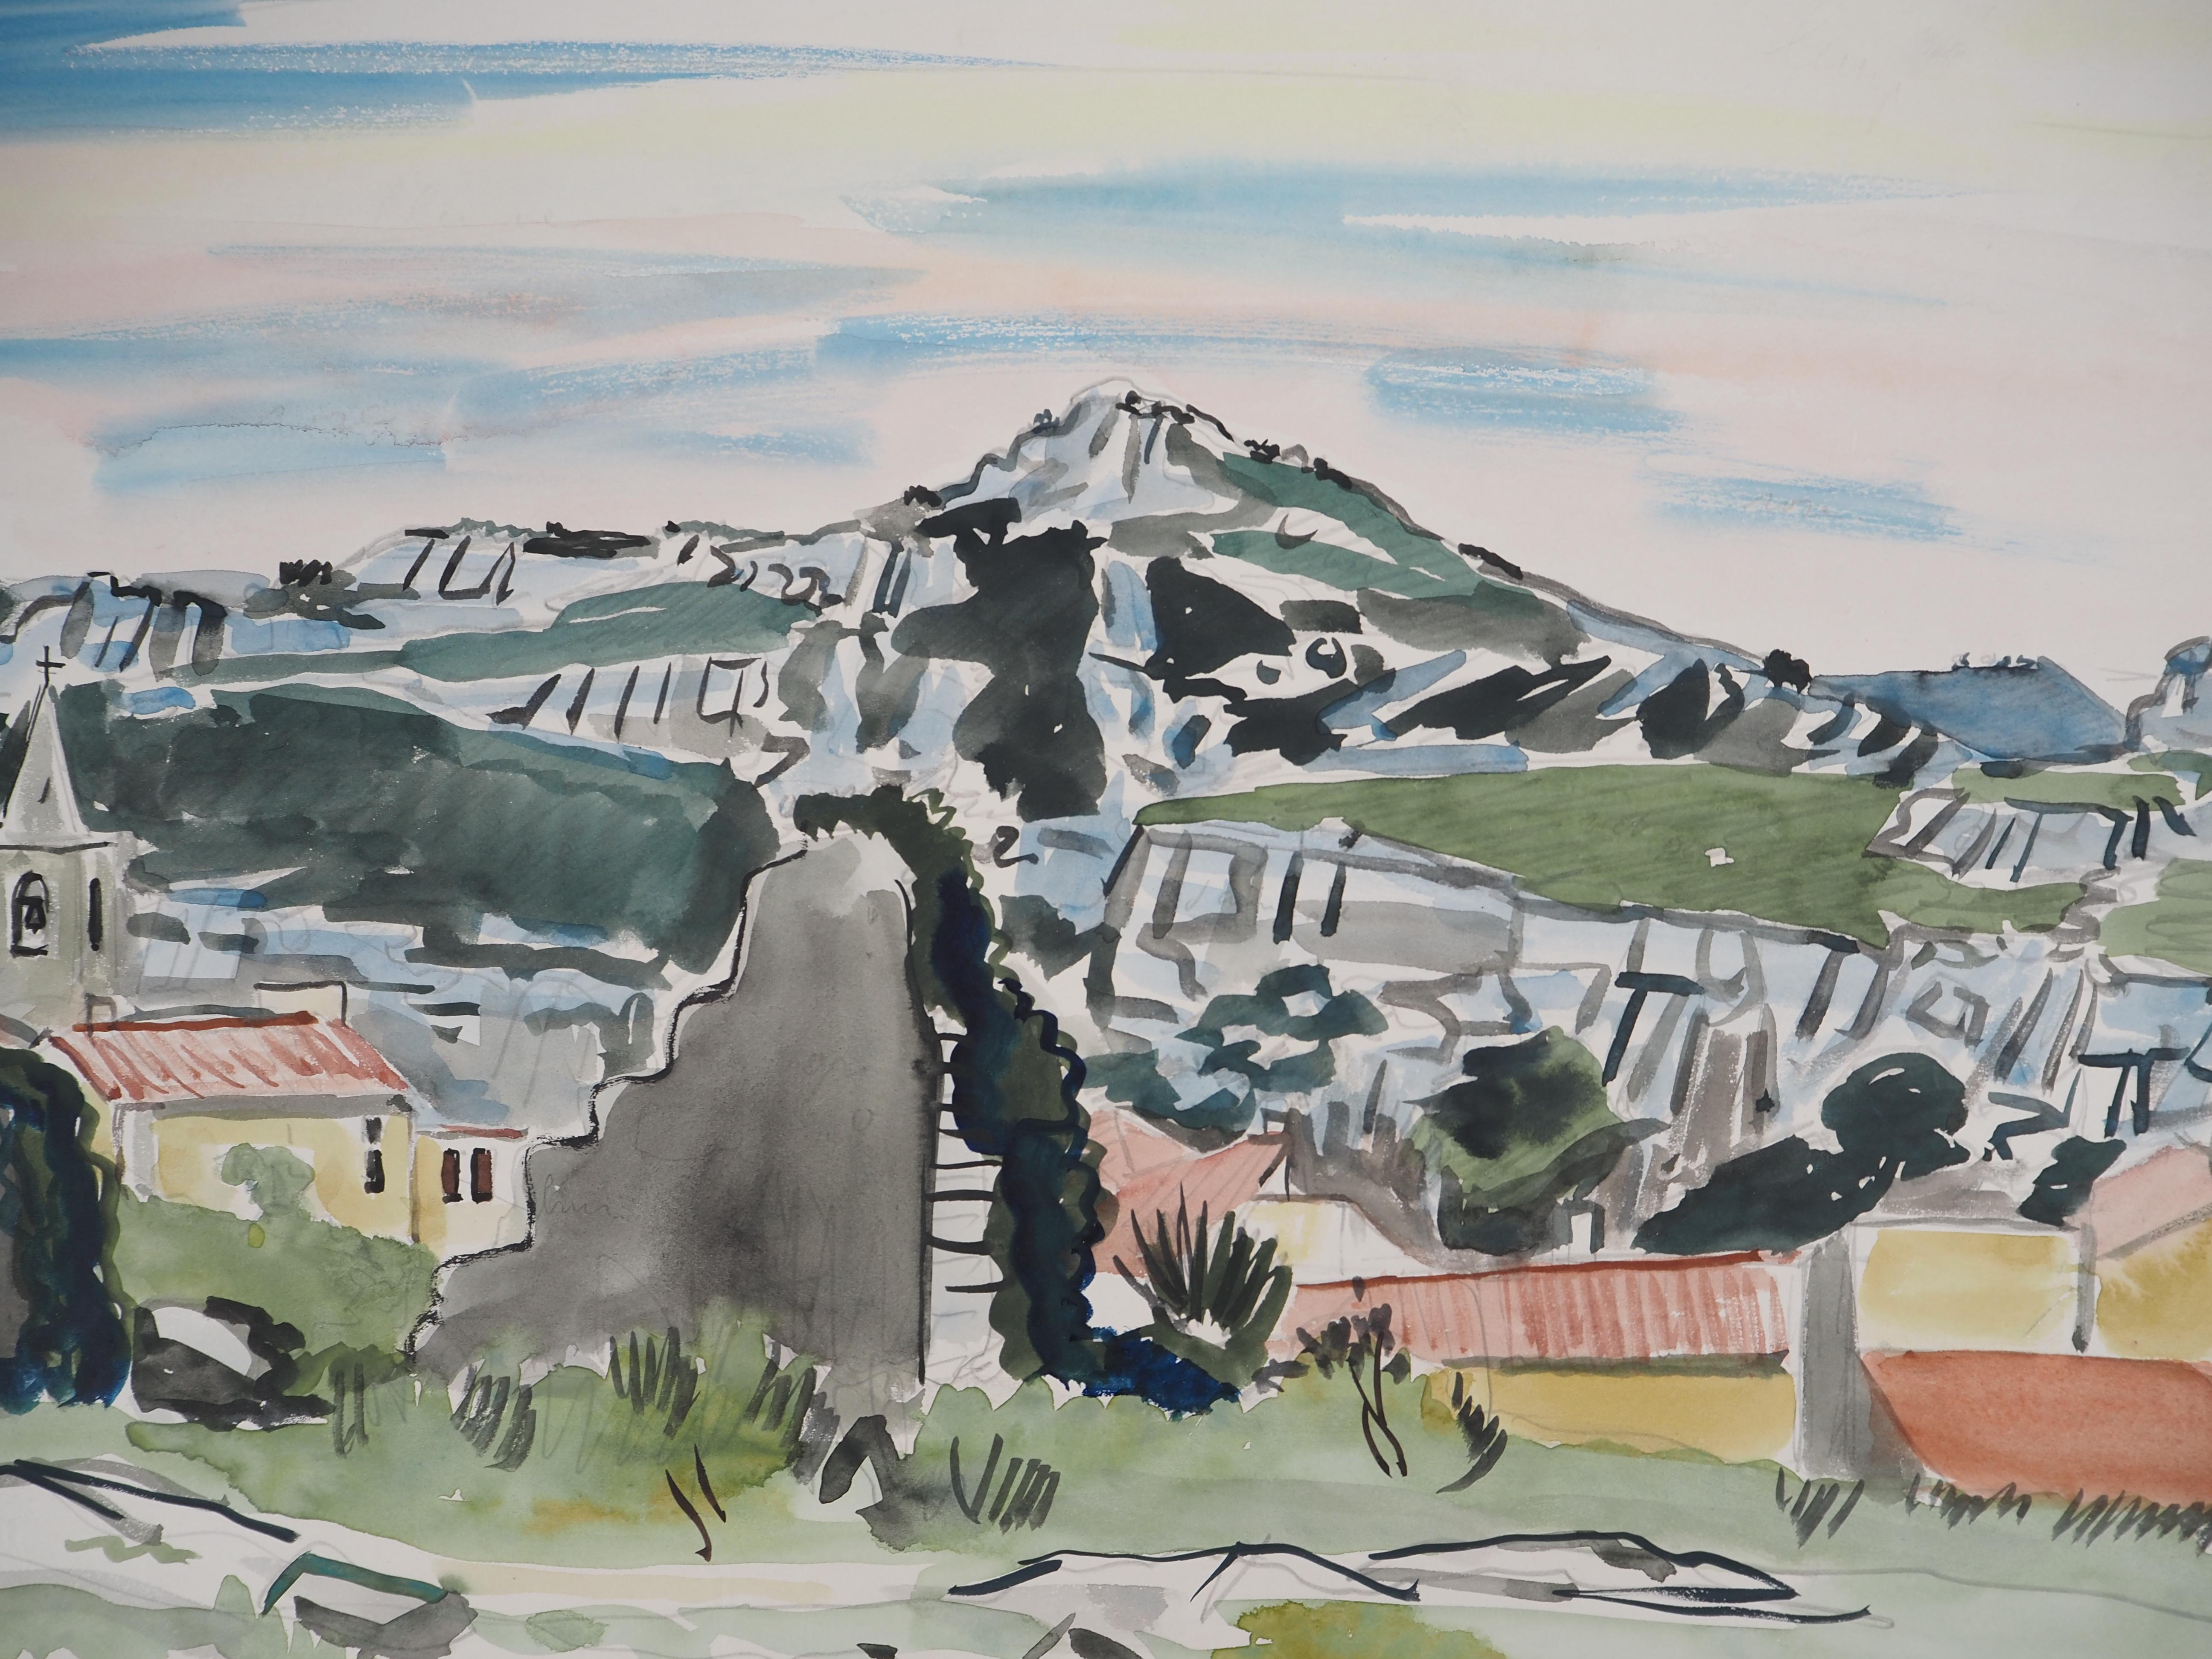 Yves BRAYER
Provence : Small Village and Mountains

Original watercolor
Signed bottom right
On paper applied on board 40 x 53 cm (c. 16 x 21 inch)

PROVENANCE : Galerie Romanet (Paris), inventory number #158-285

Excellent condition